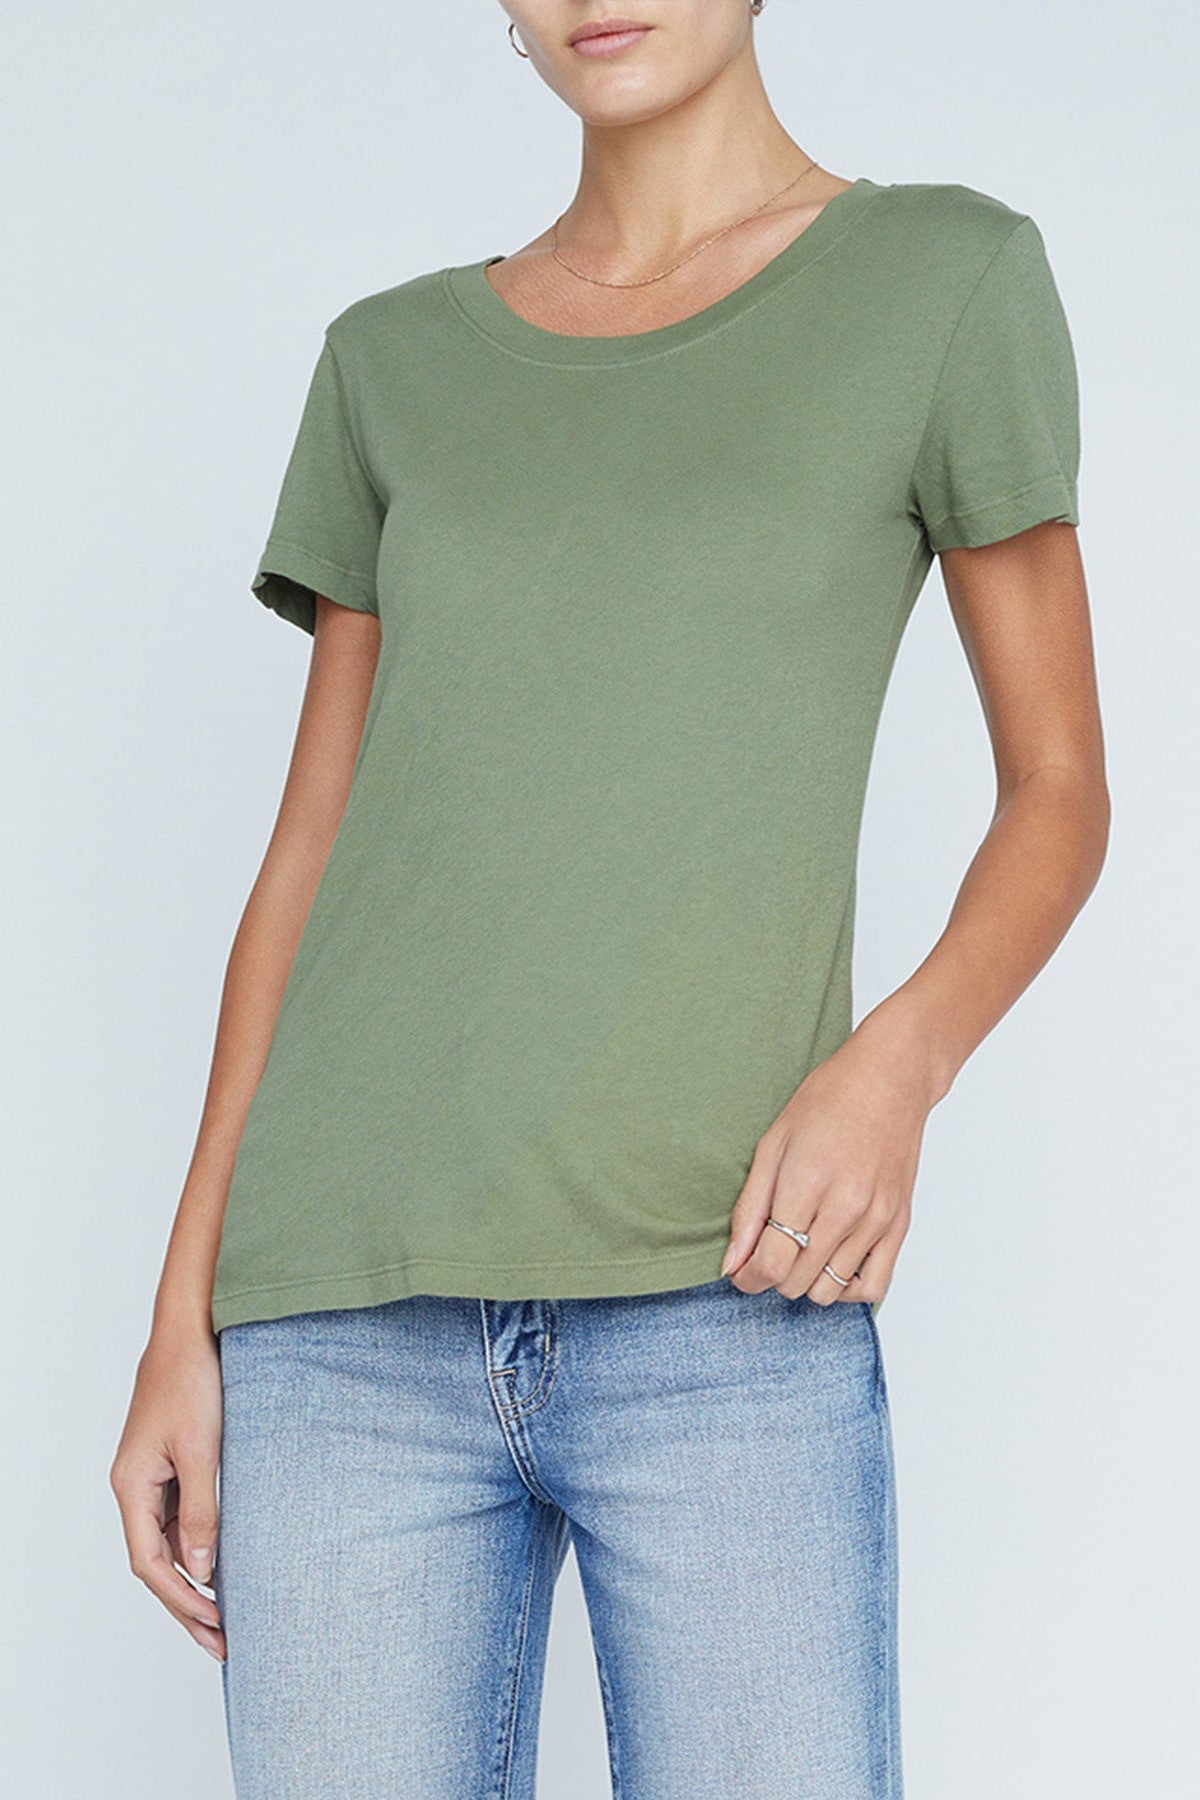 L'AGENCE CORY SCOOP CREW NECK TEE IN CLOVER